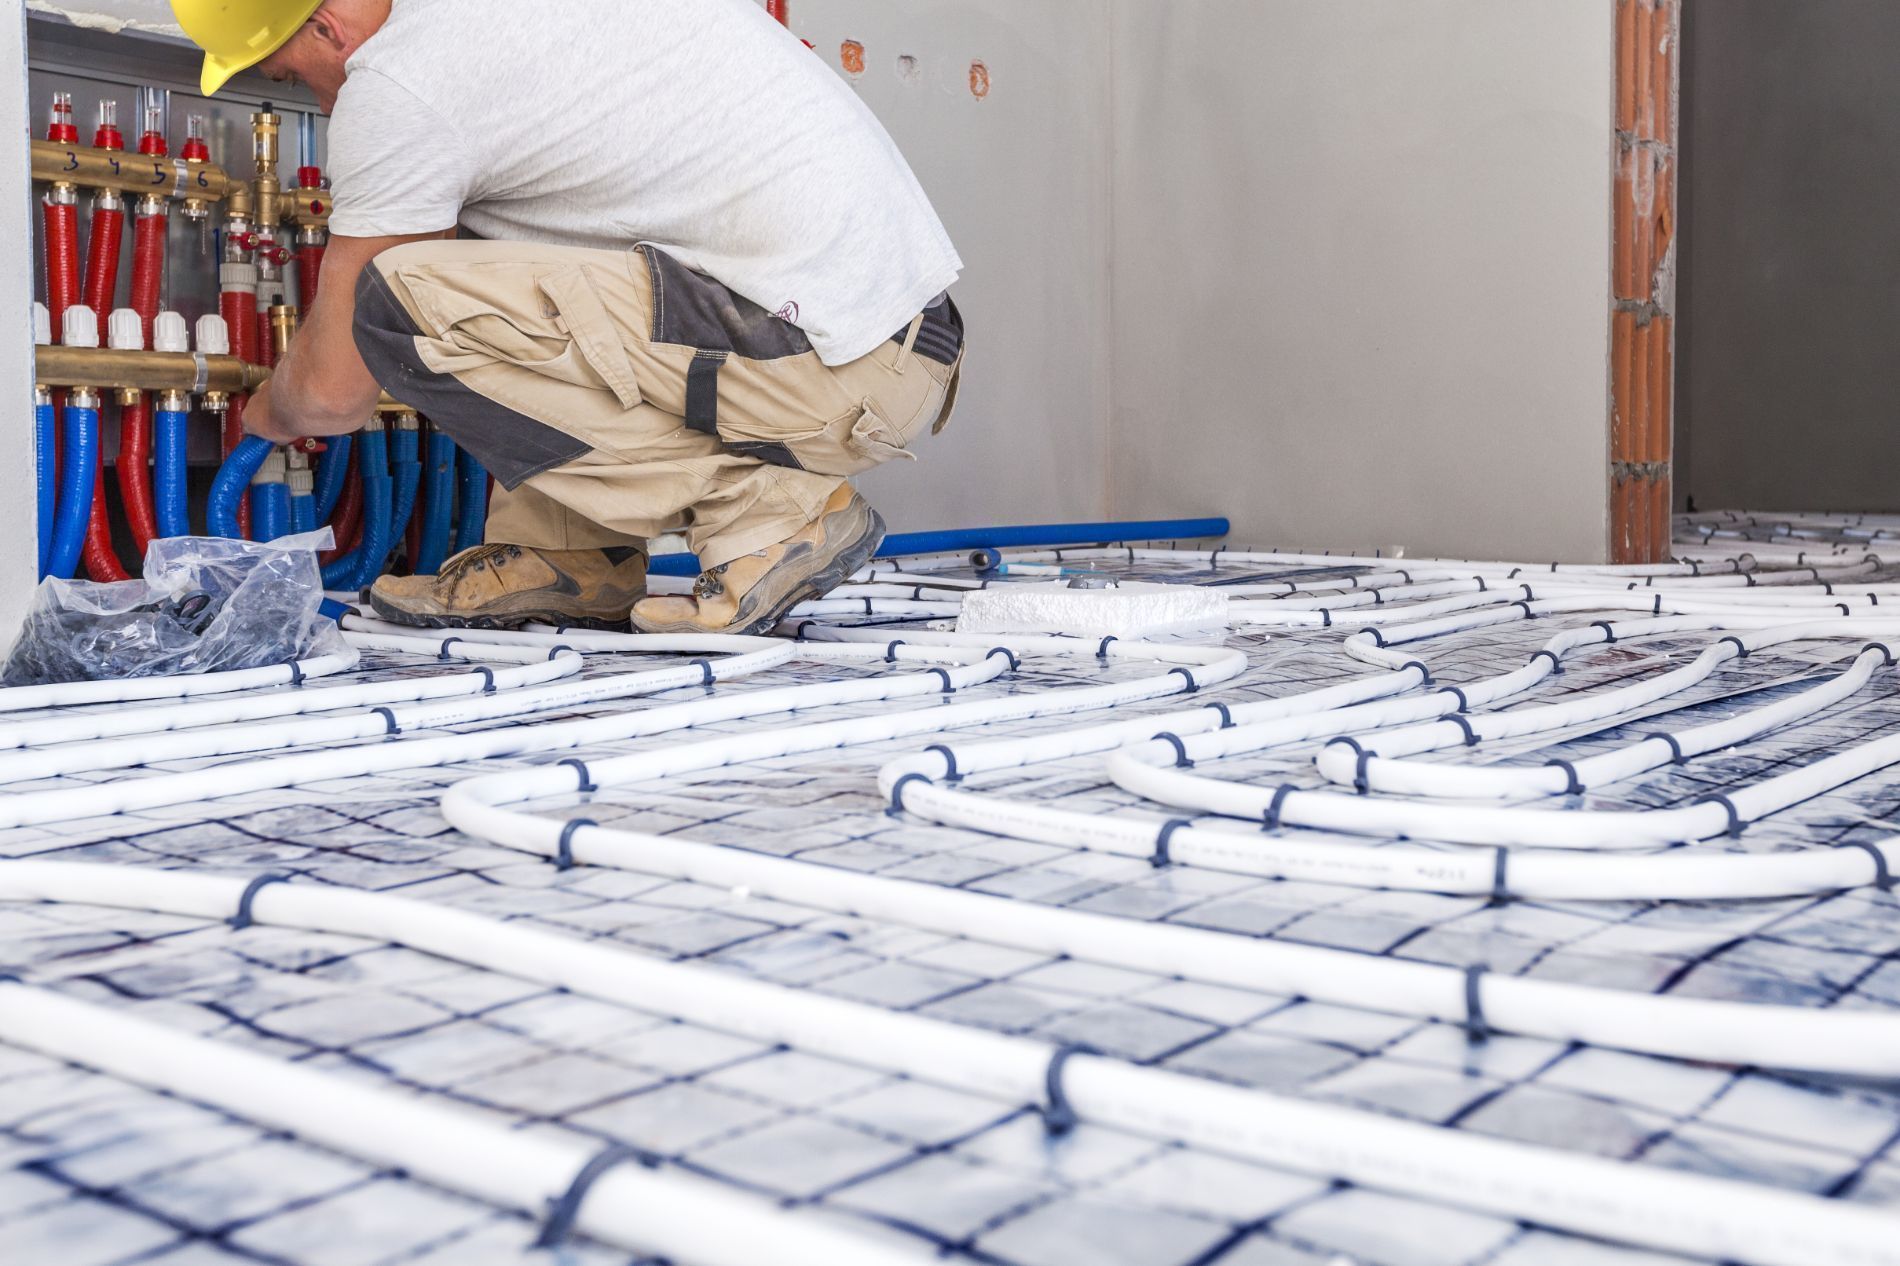 A man is installing underfloor heating pipes on the floor – USA - Regal Construction Inc.